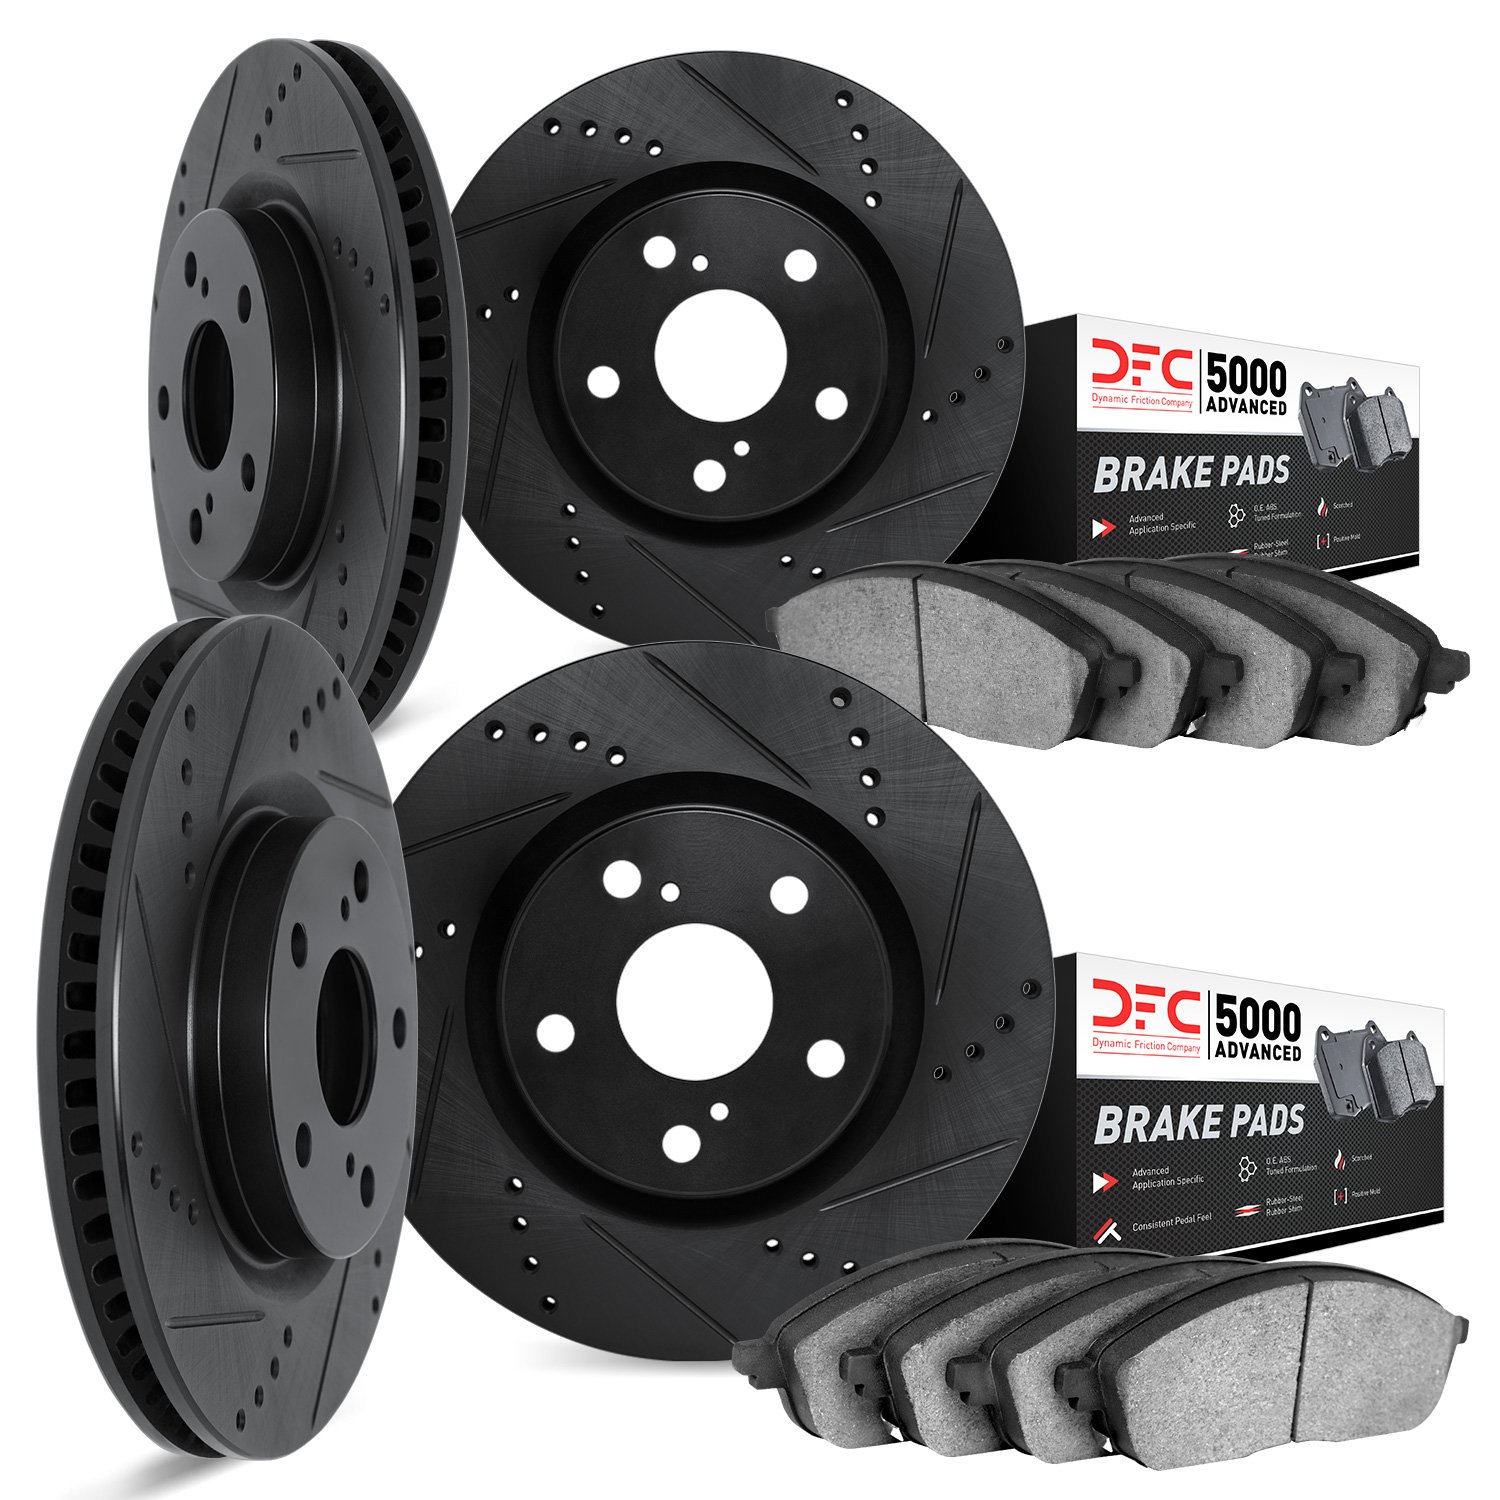 8504-31052 Drilled/Slotted Brake Rotors w/5000 Advanced Brake Pads Kit [Black], 2007-2015 BMW, Position: Front and Rear